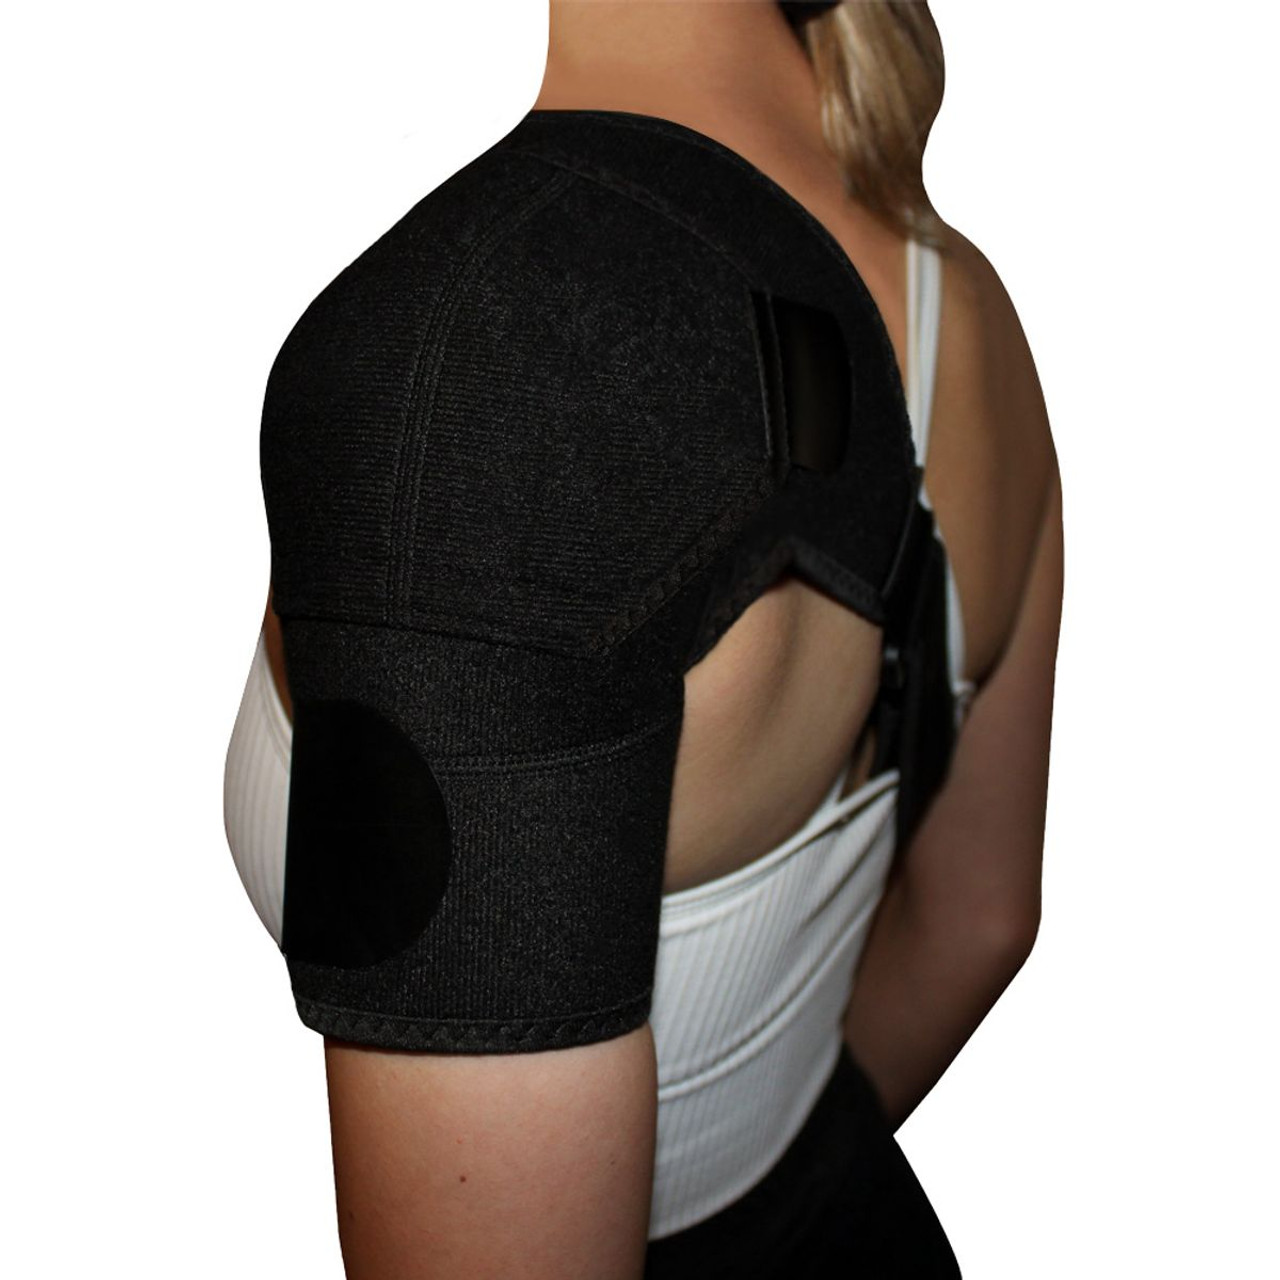 Adjustable Recovery Shoulder Brace for Injuries & Tendonitis, One-Size product image